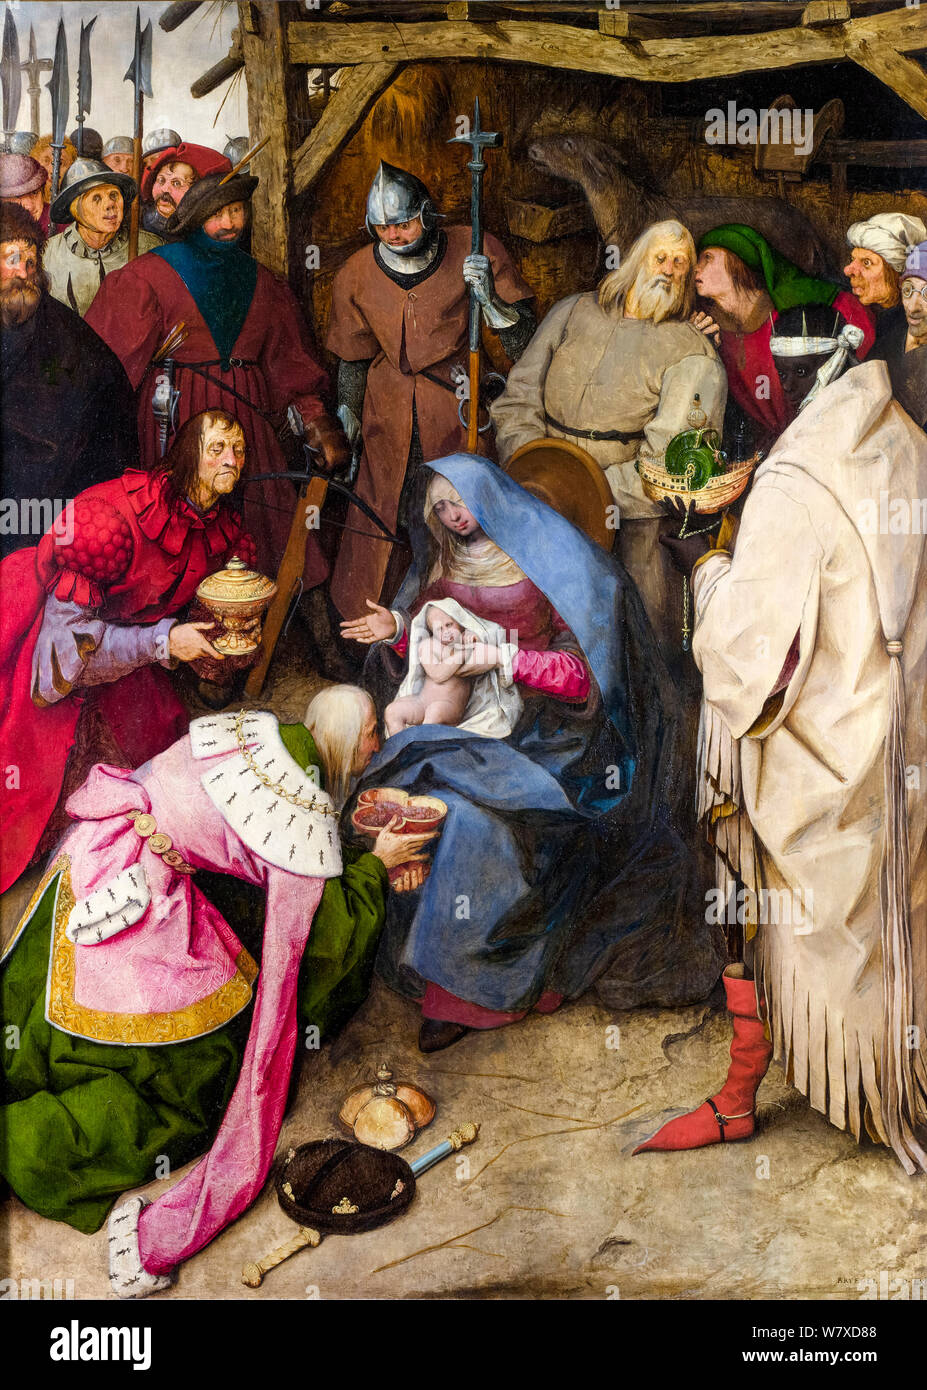 Pieter Bruegel the Elder, The Adoration of the Kings, painting, 1564 Stock Photo